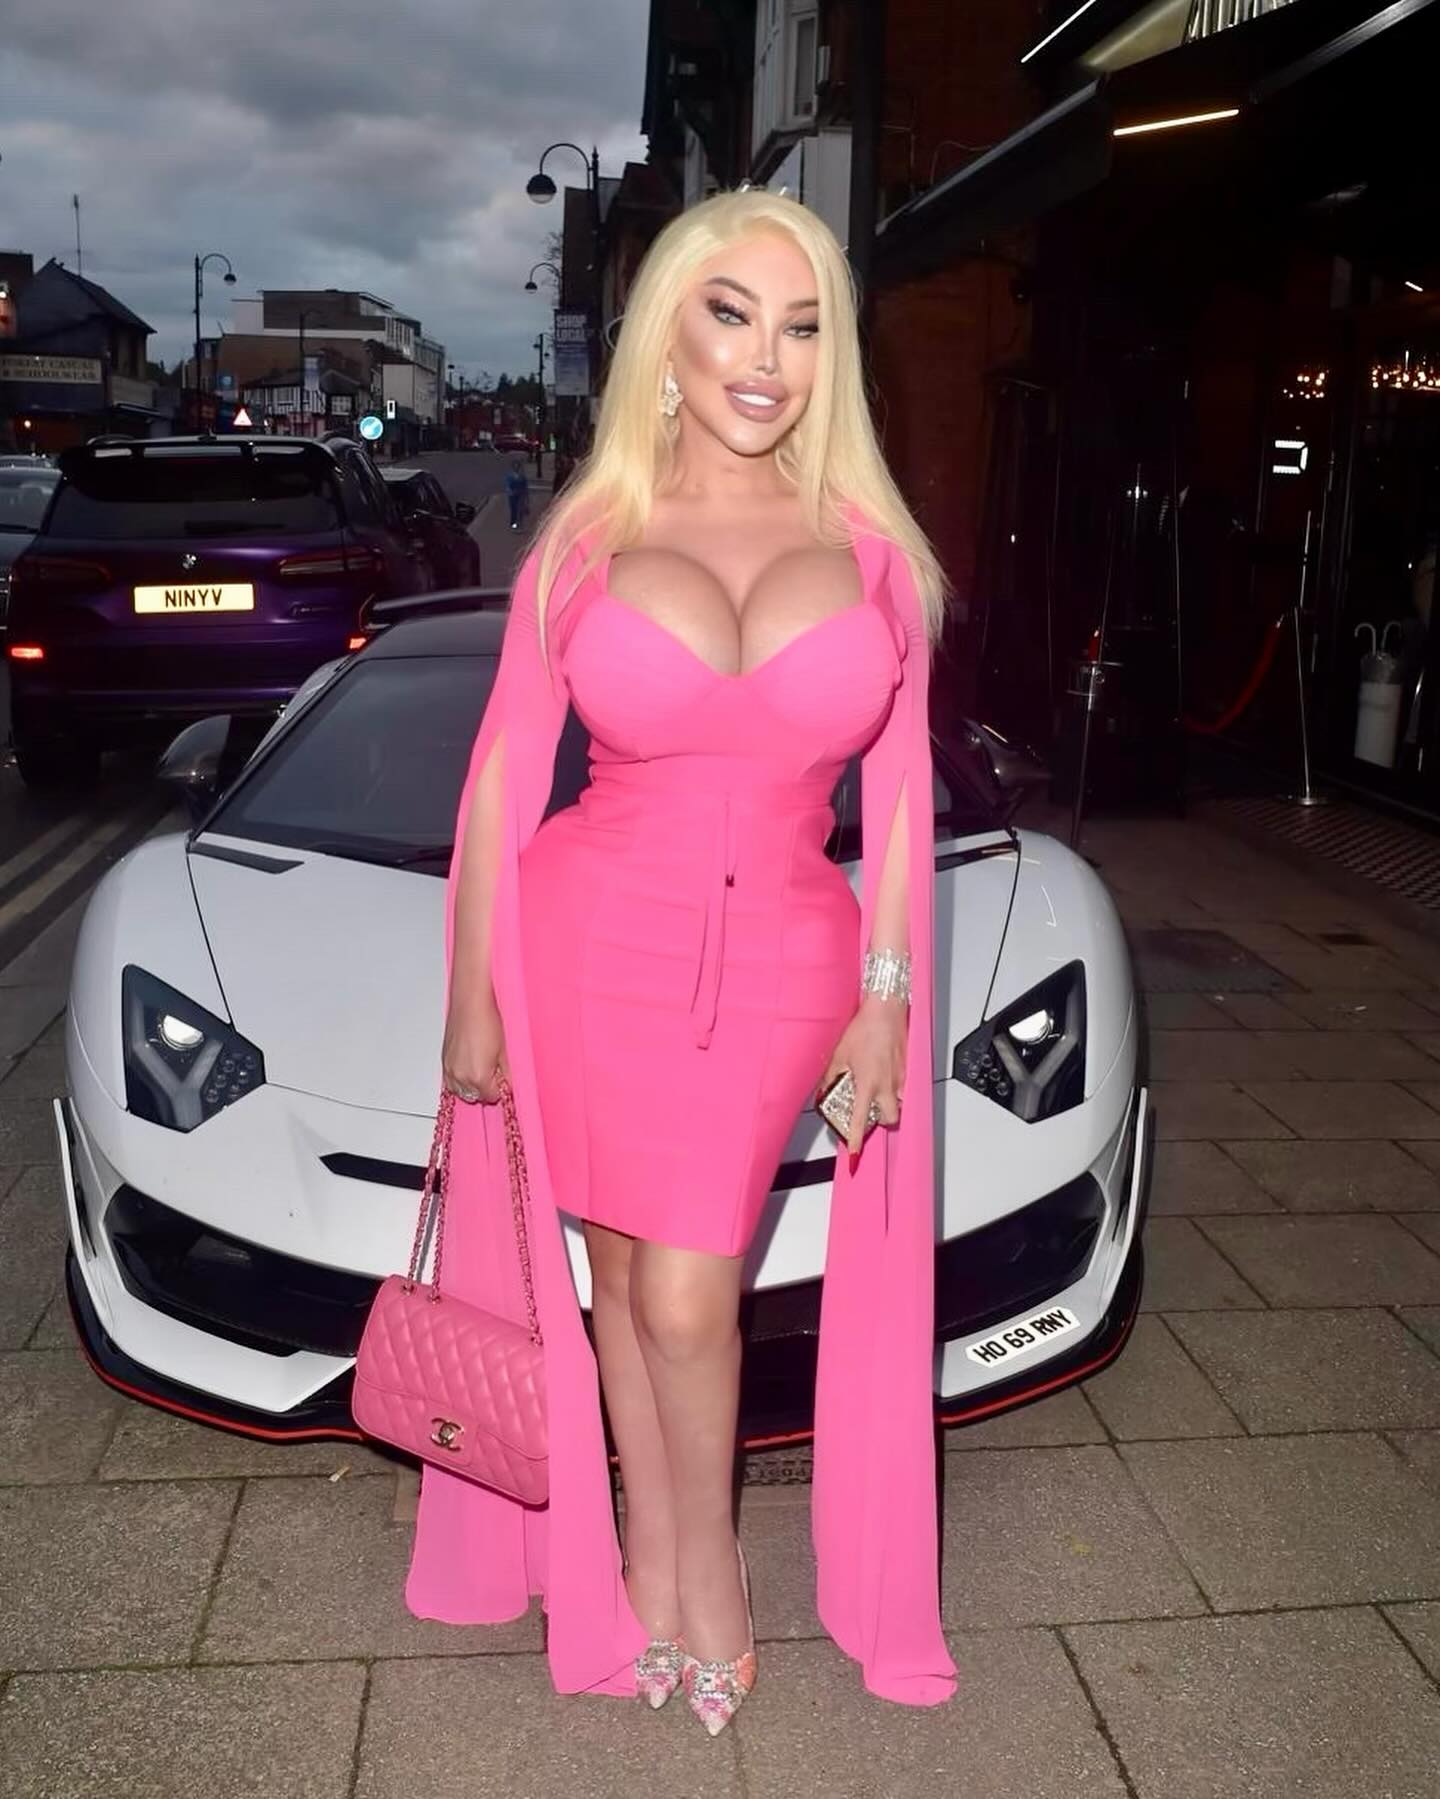 Life is like riding a bicycle. To keep your balance, you must keep moving in style by @FashionNova #NovaBabe #FashionNova 

#jessicaalves #pinkdress